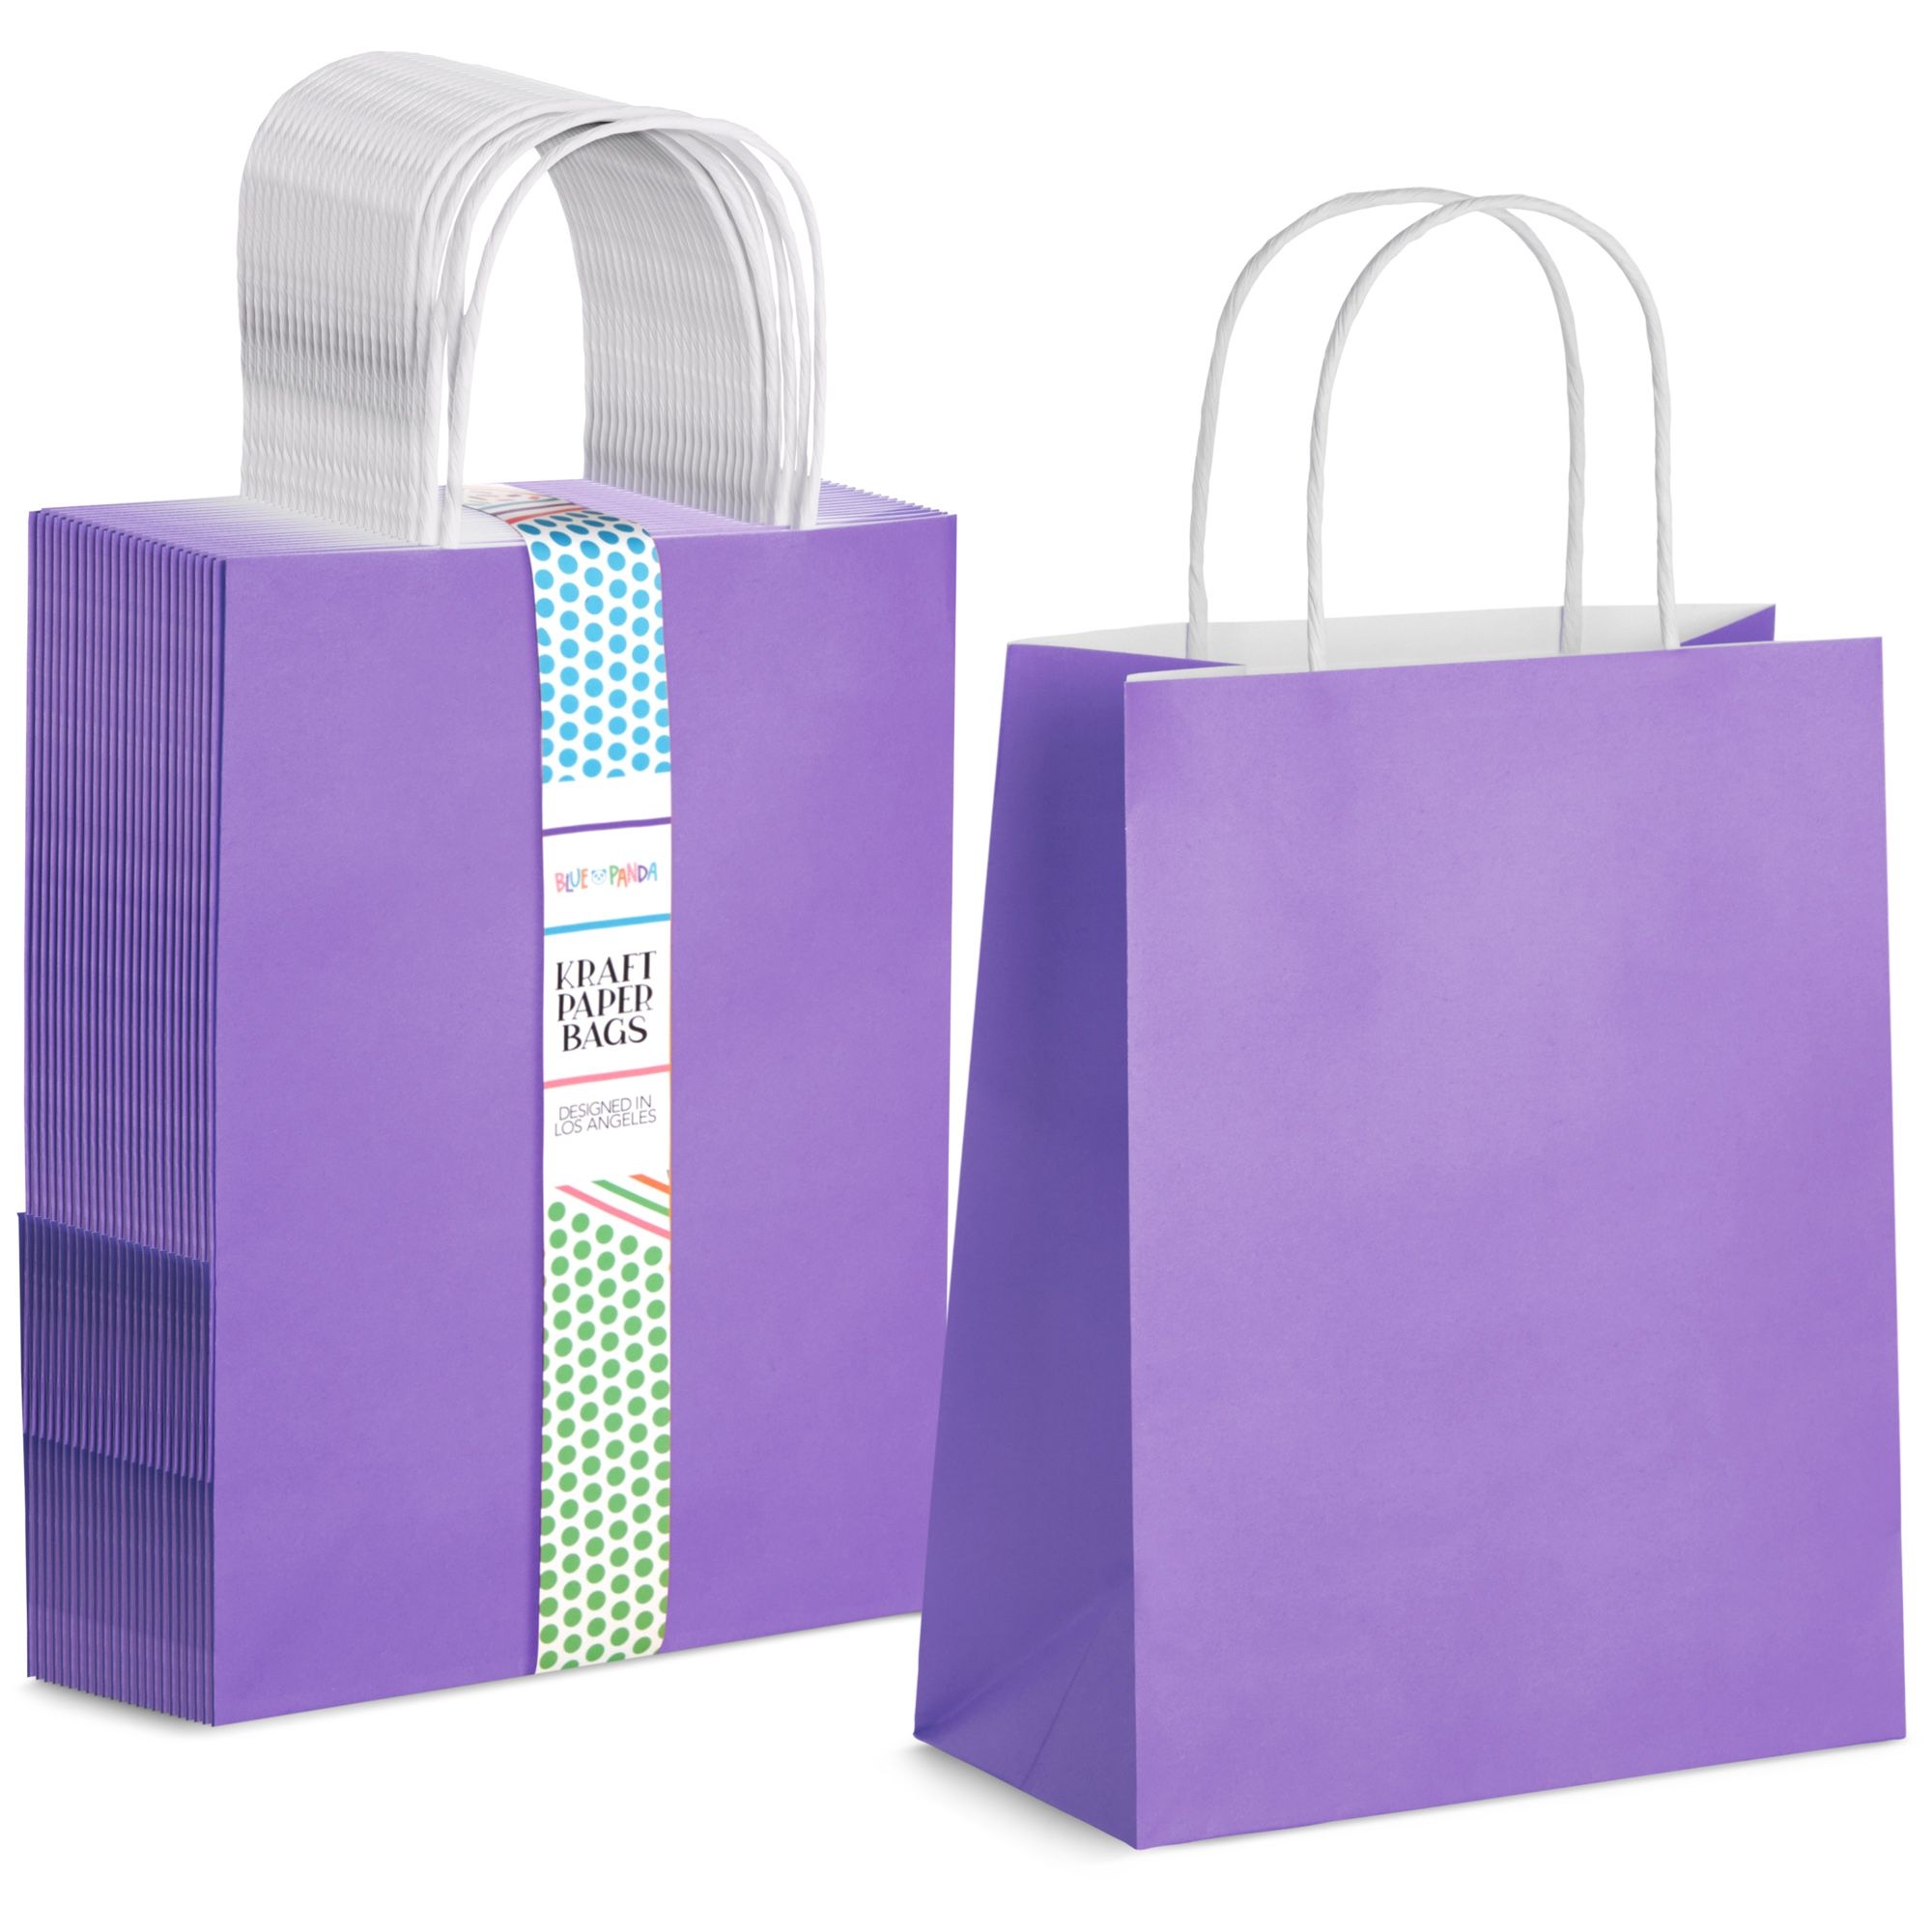 25-Pack Purple Gift Bags with Handles - Medium Size Paper Bags for  Birthday, Wedding, Retail (8x3.9x10 In)